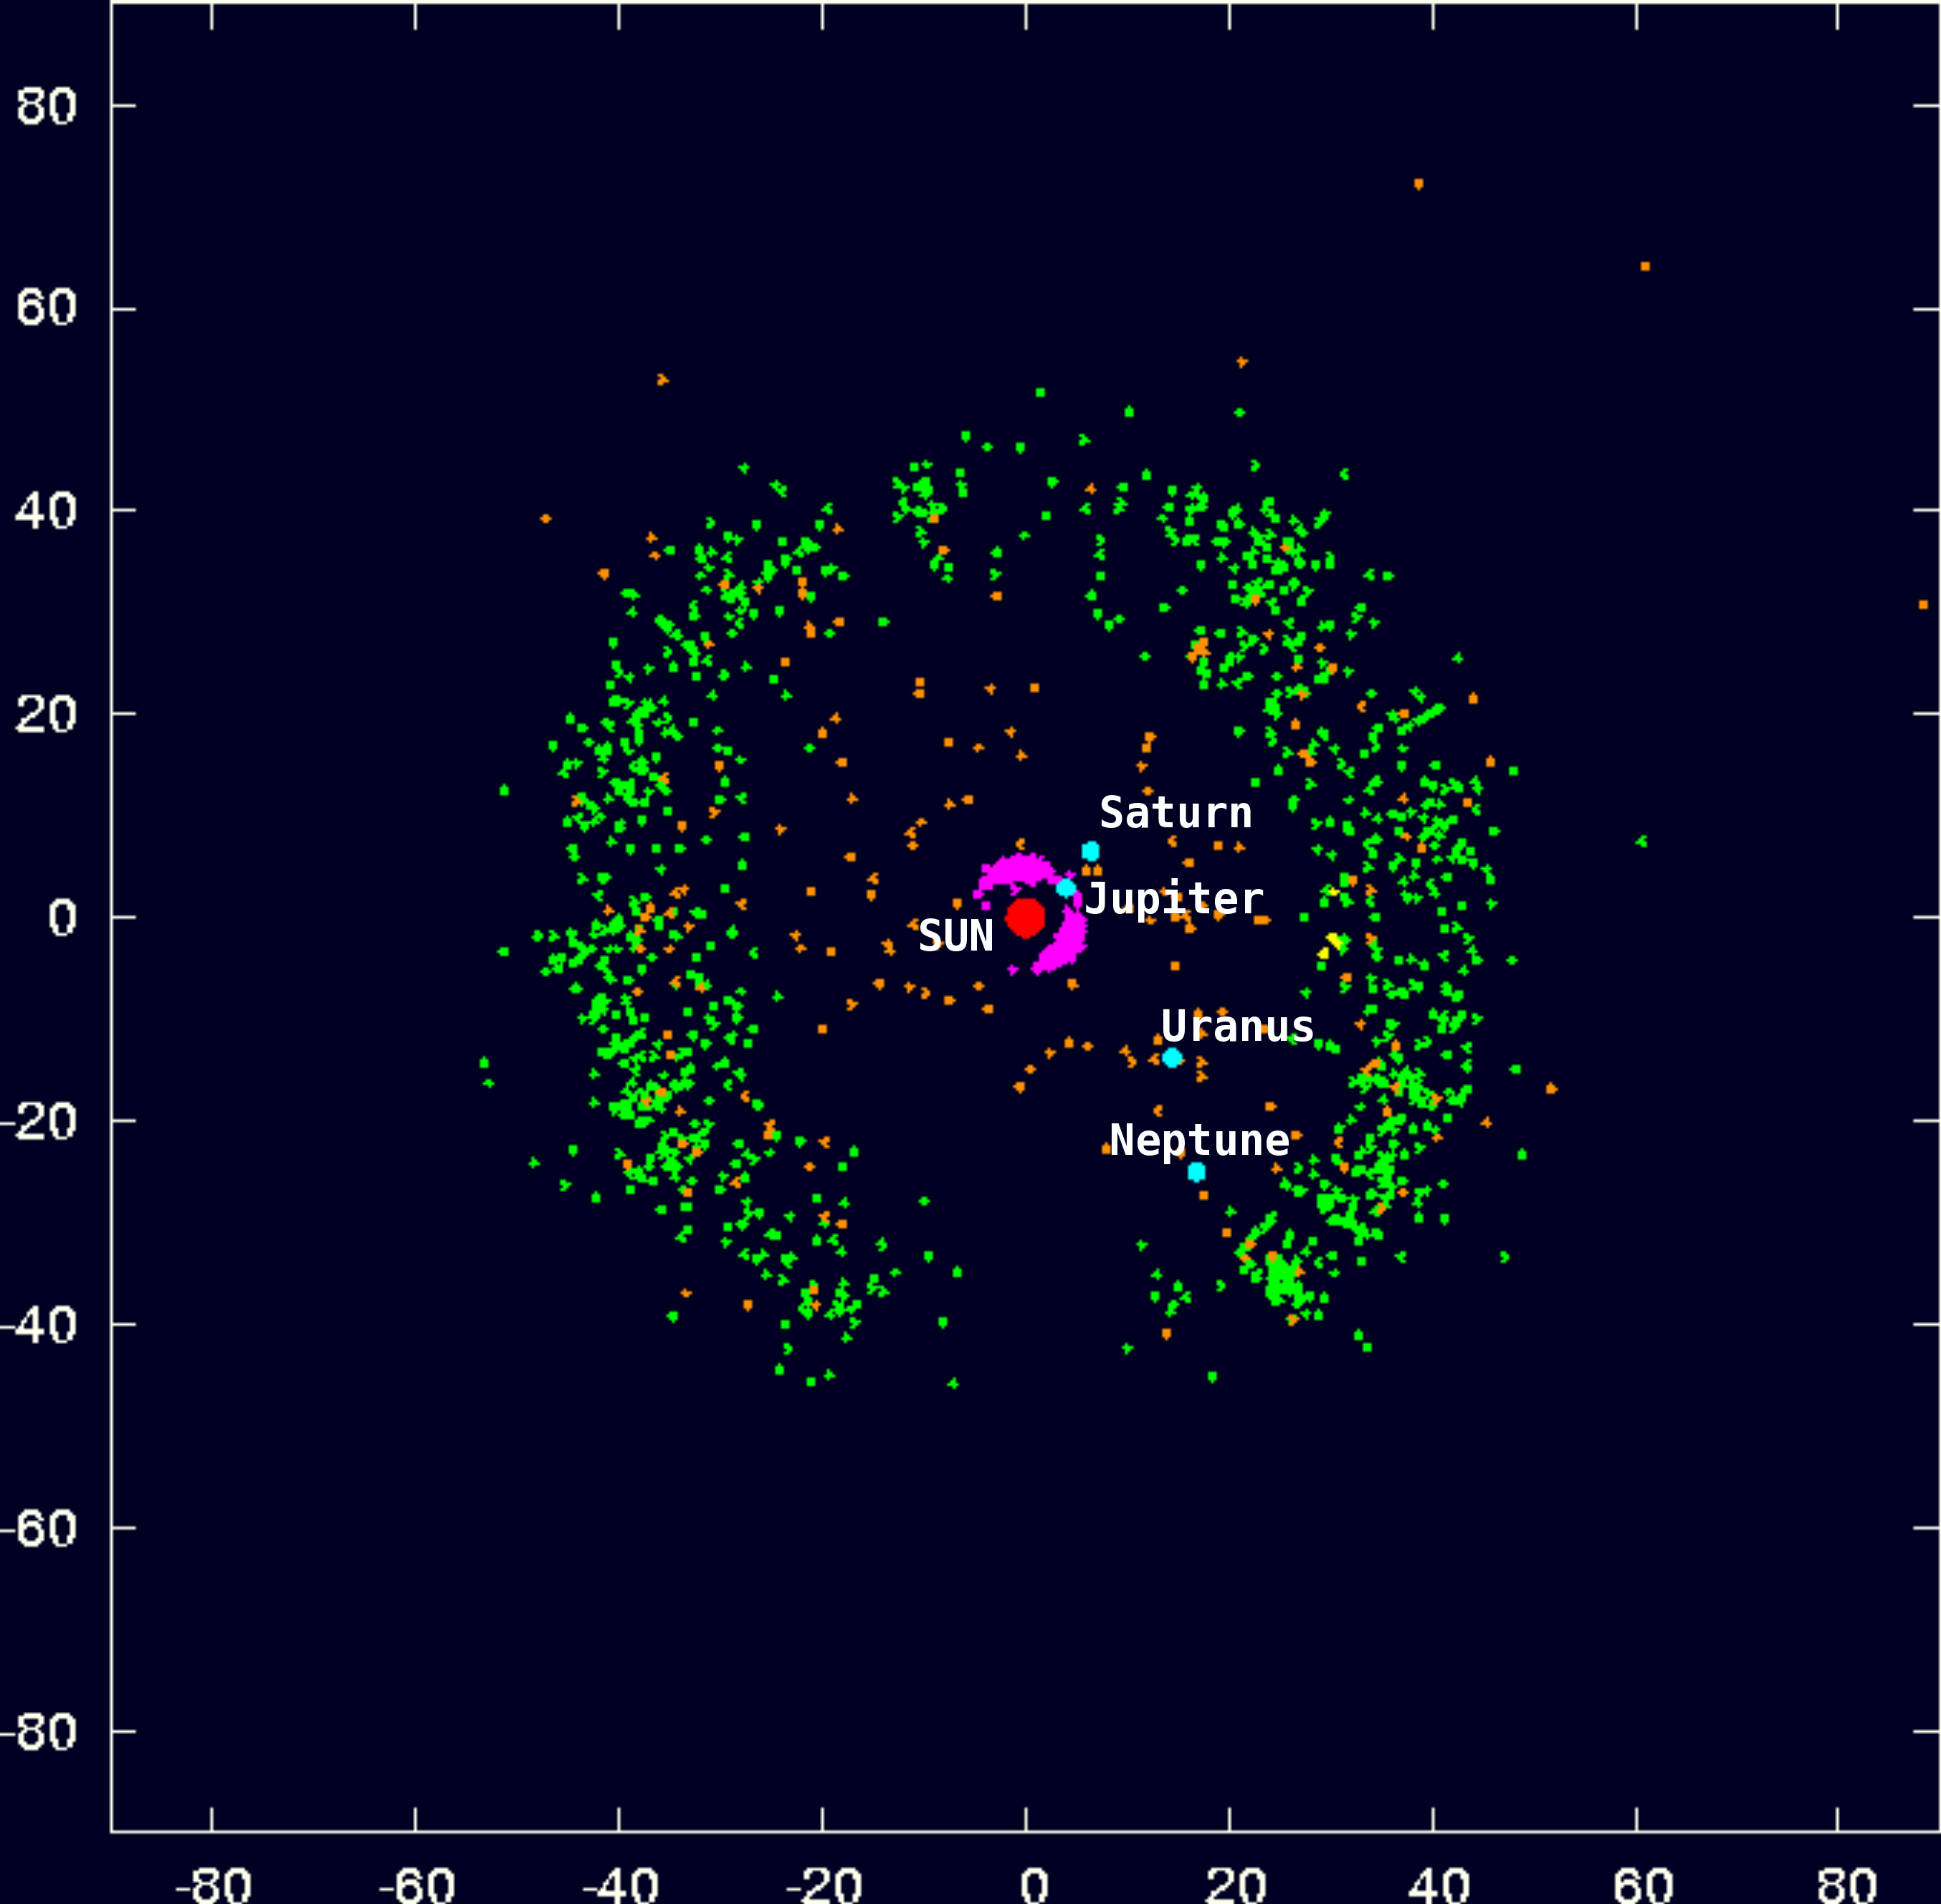 Plot of the positions of all known Kuiper belt objects (green), set against the outer planets (blue). Axes list distances in AU, projected onto the ecliptic, with ecliptic longitude zero being to the right, along the 